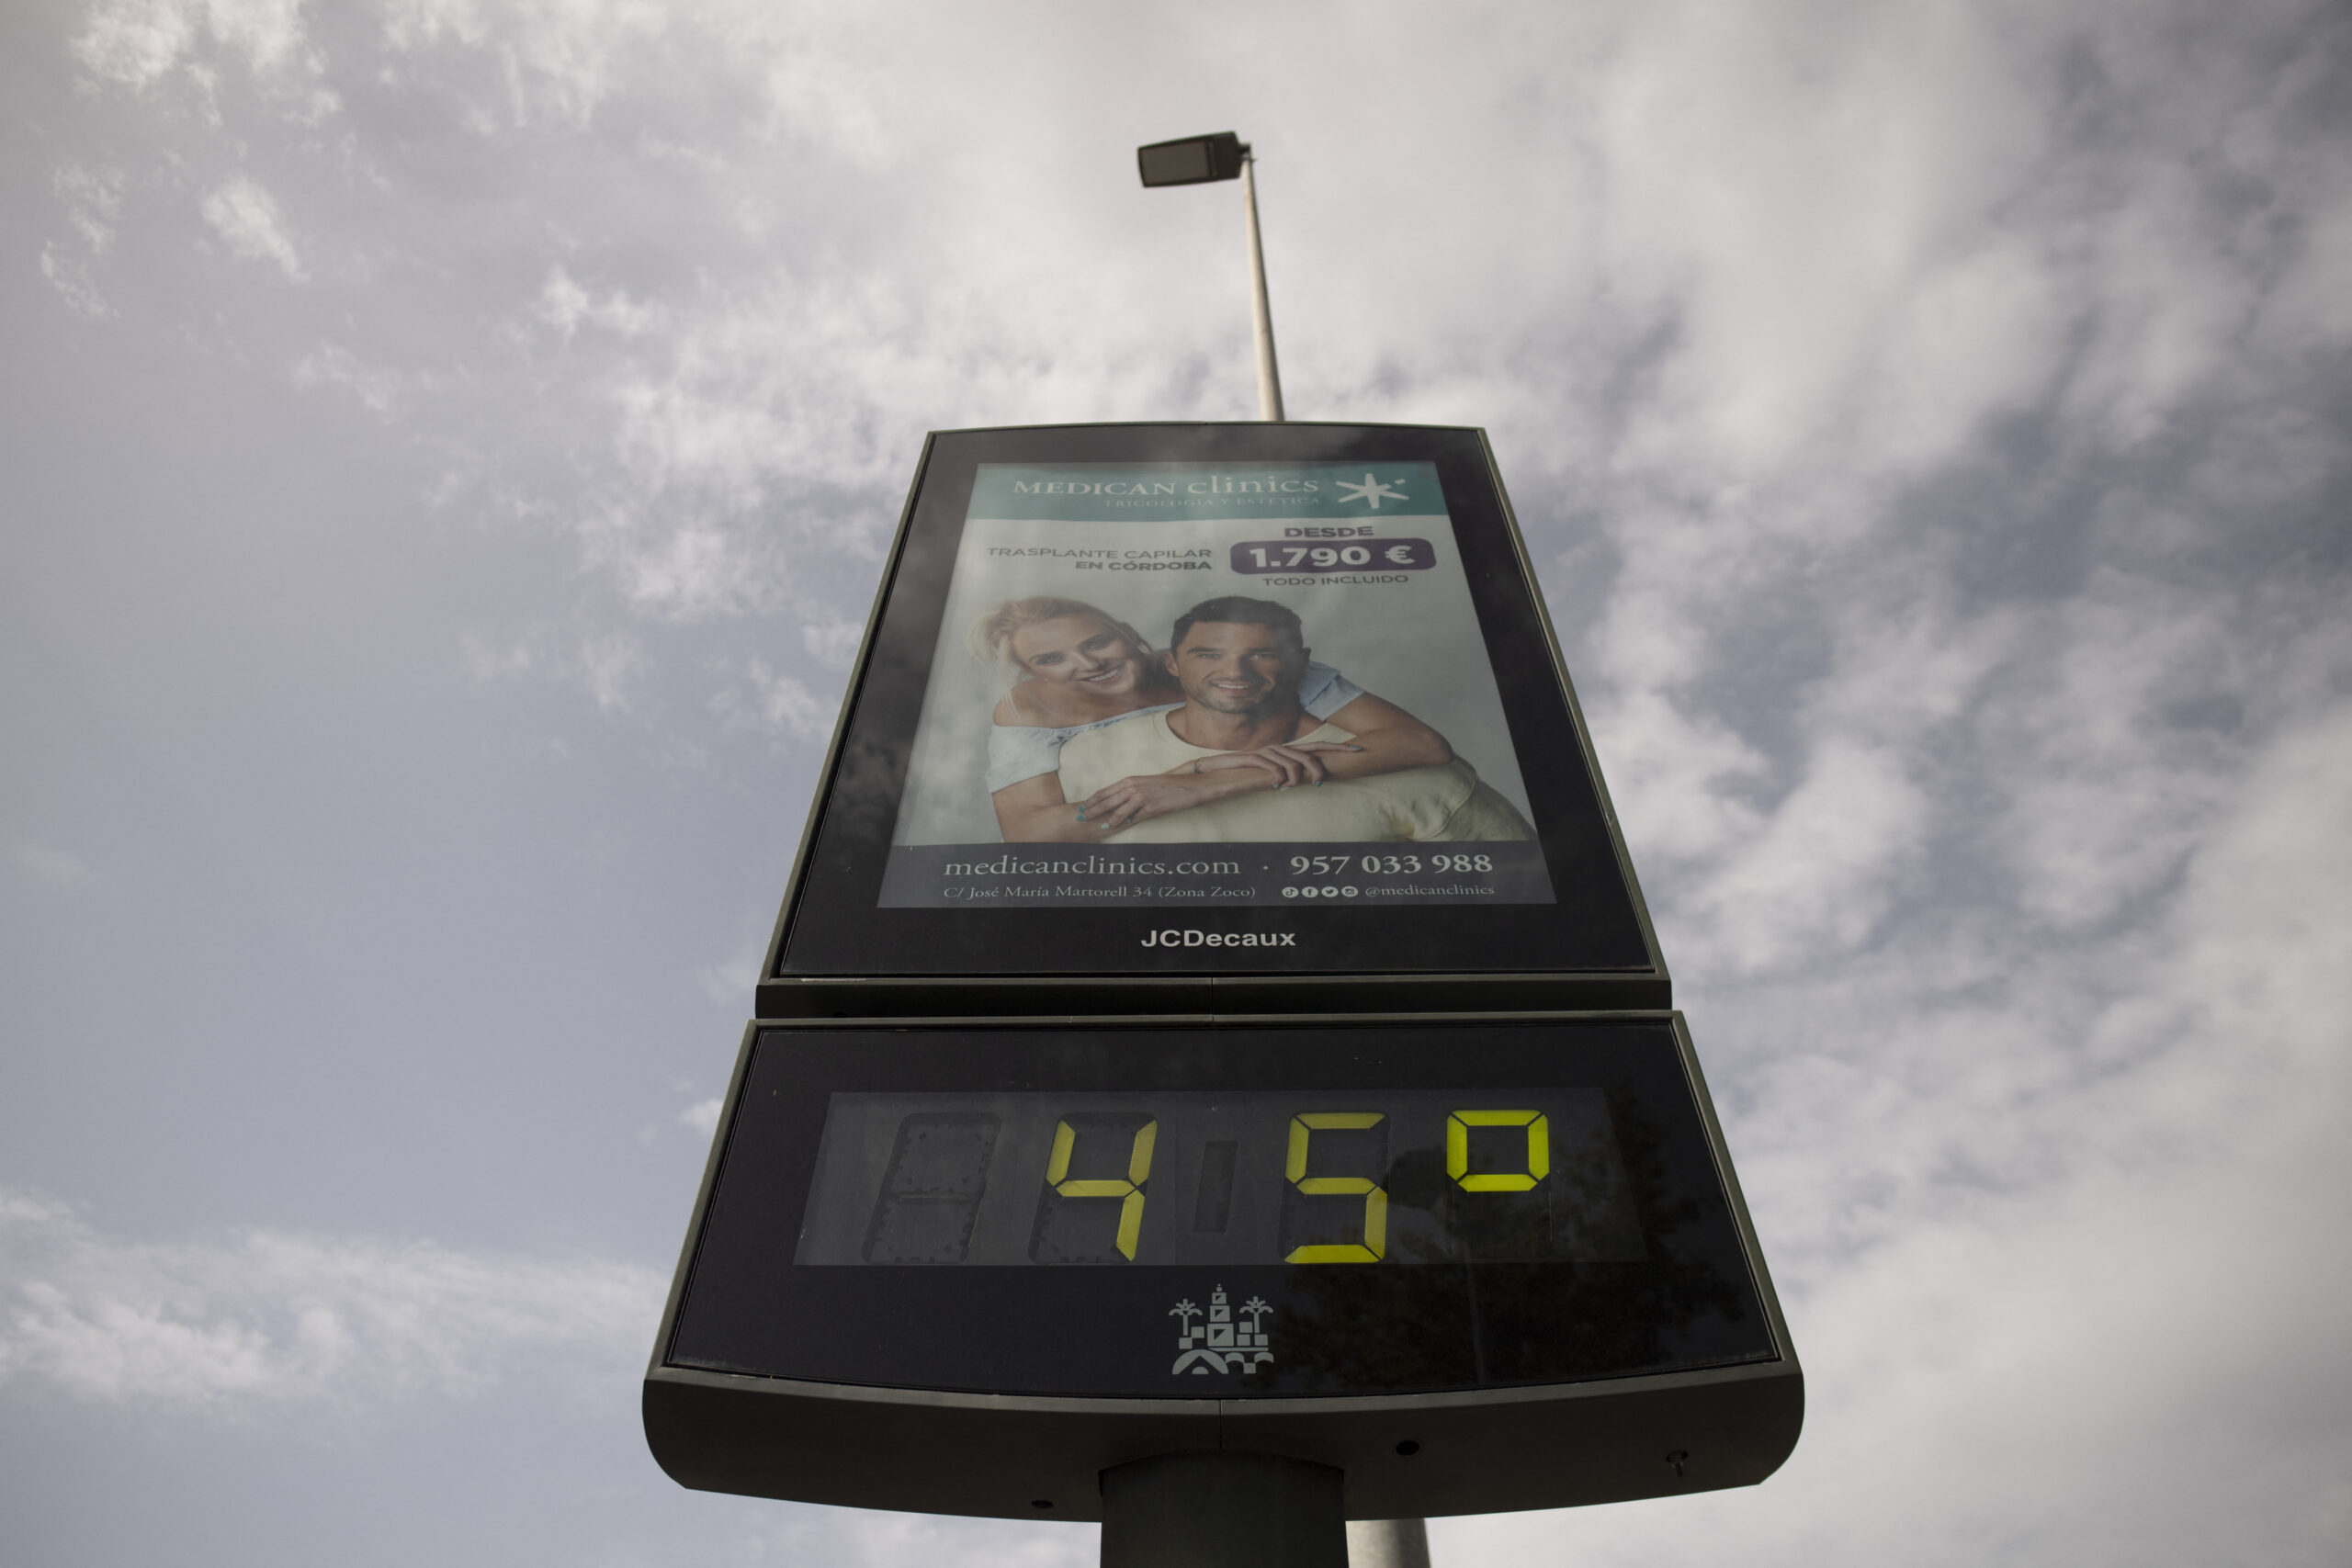 SPAIN-WEATHER-CLIMATE-WARMING